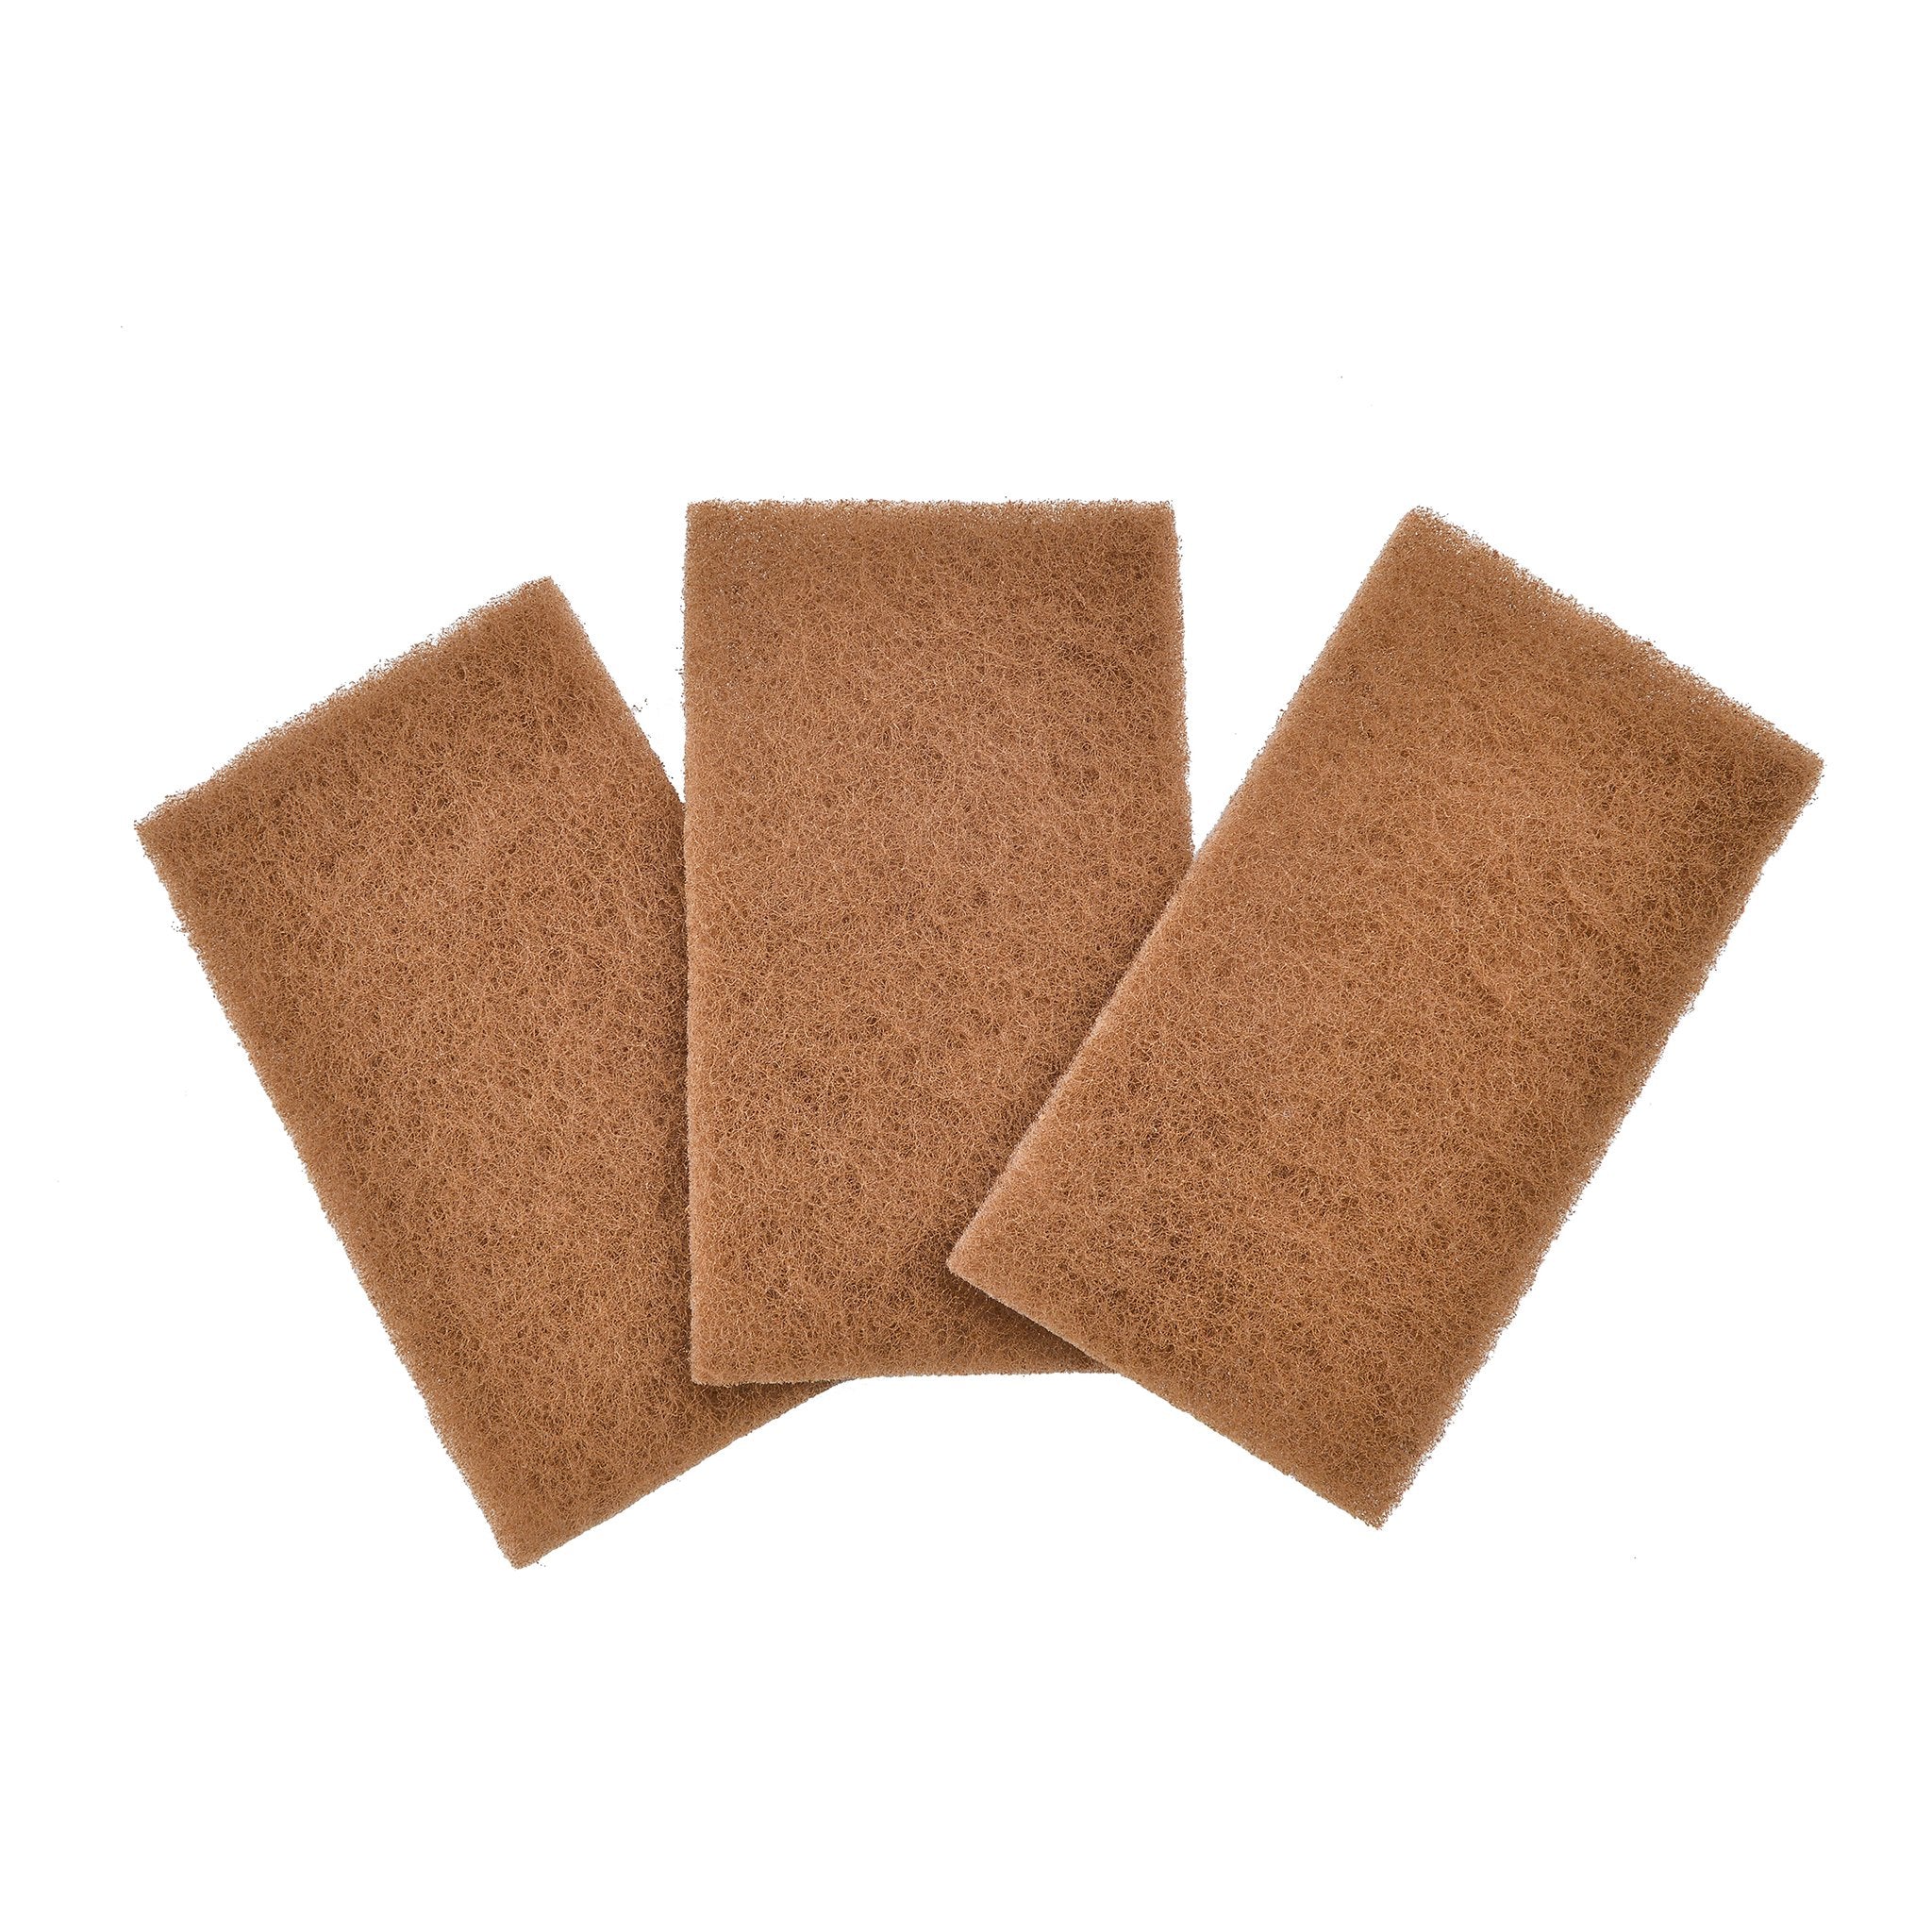 3-pack Coconut Fiber Kitchen Scrubbers - Light brown - Home All